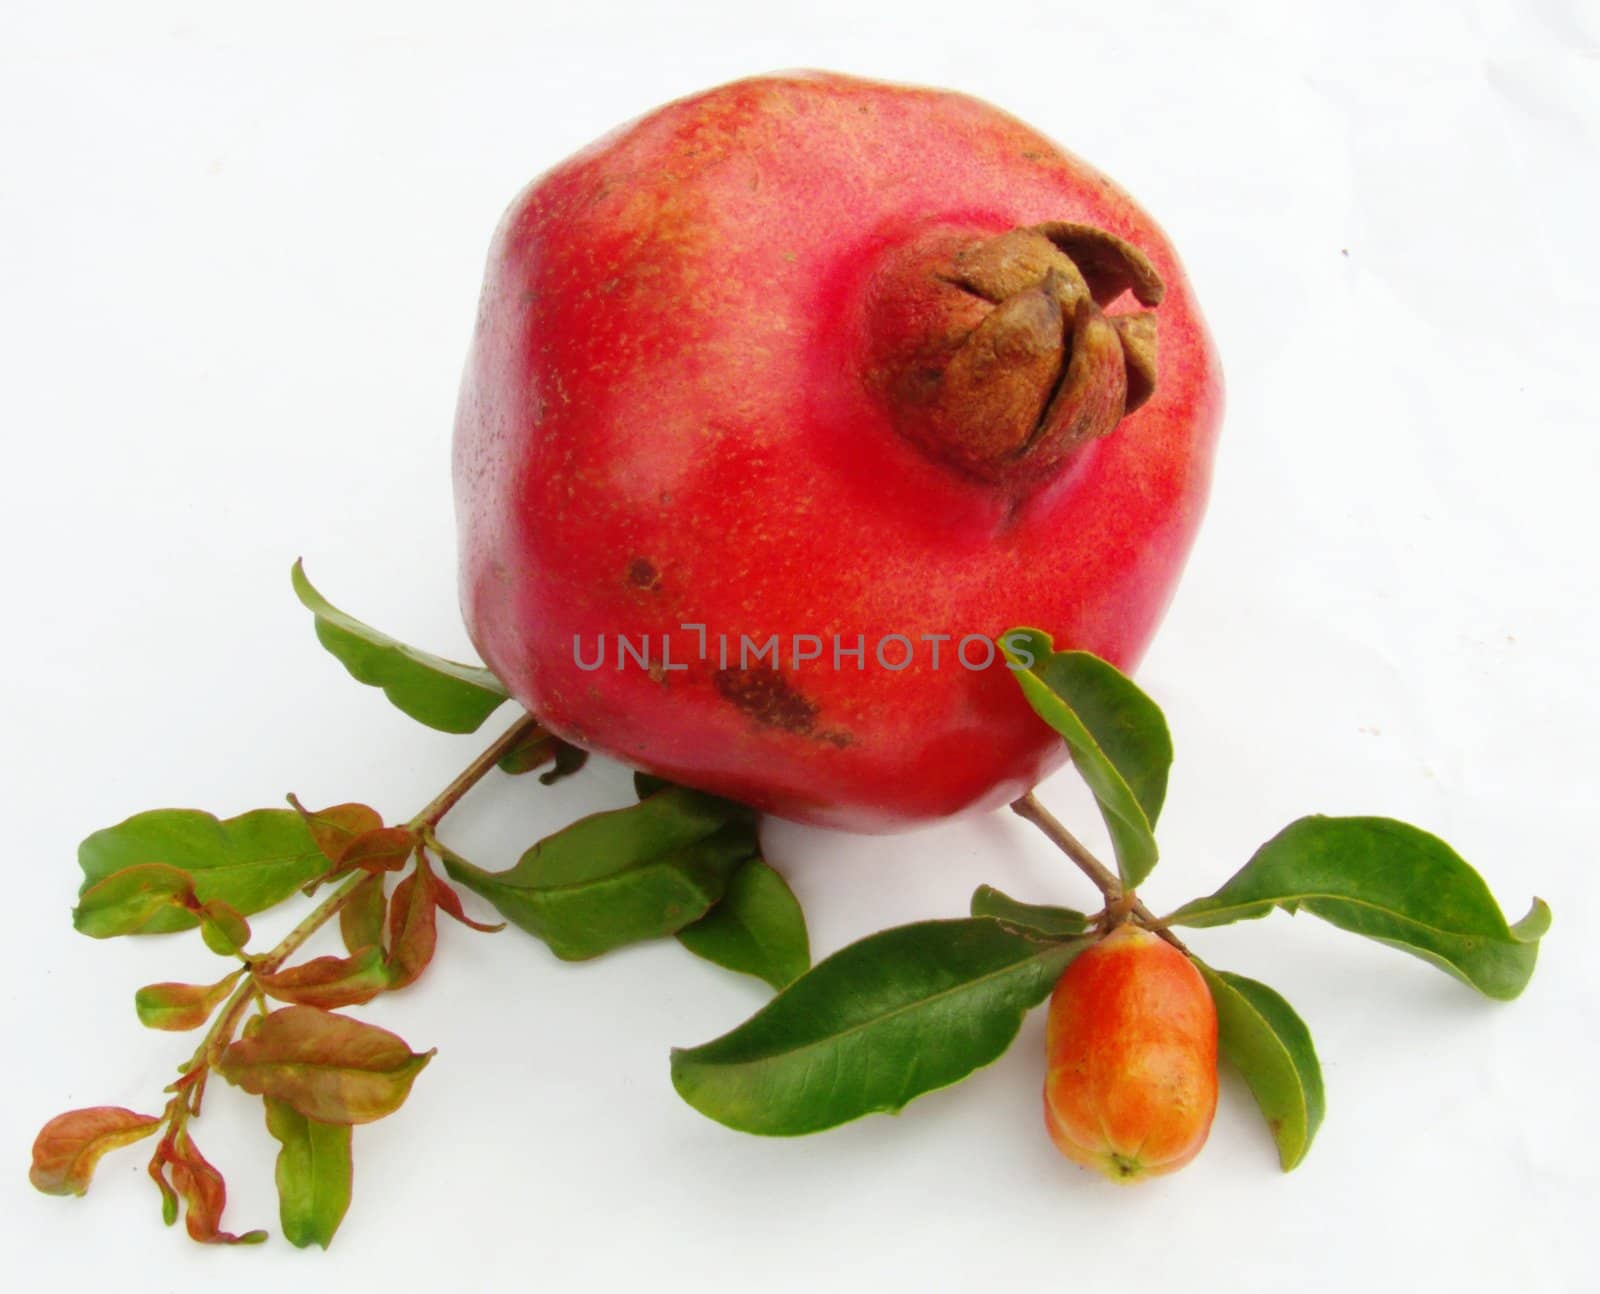 pomegranate (Punica granatum) fruit with leaves  by lkant